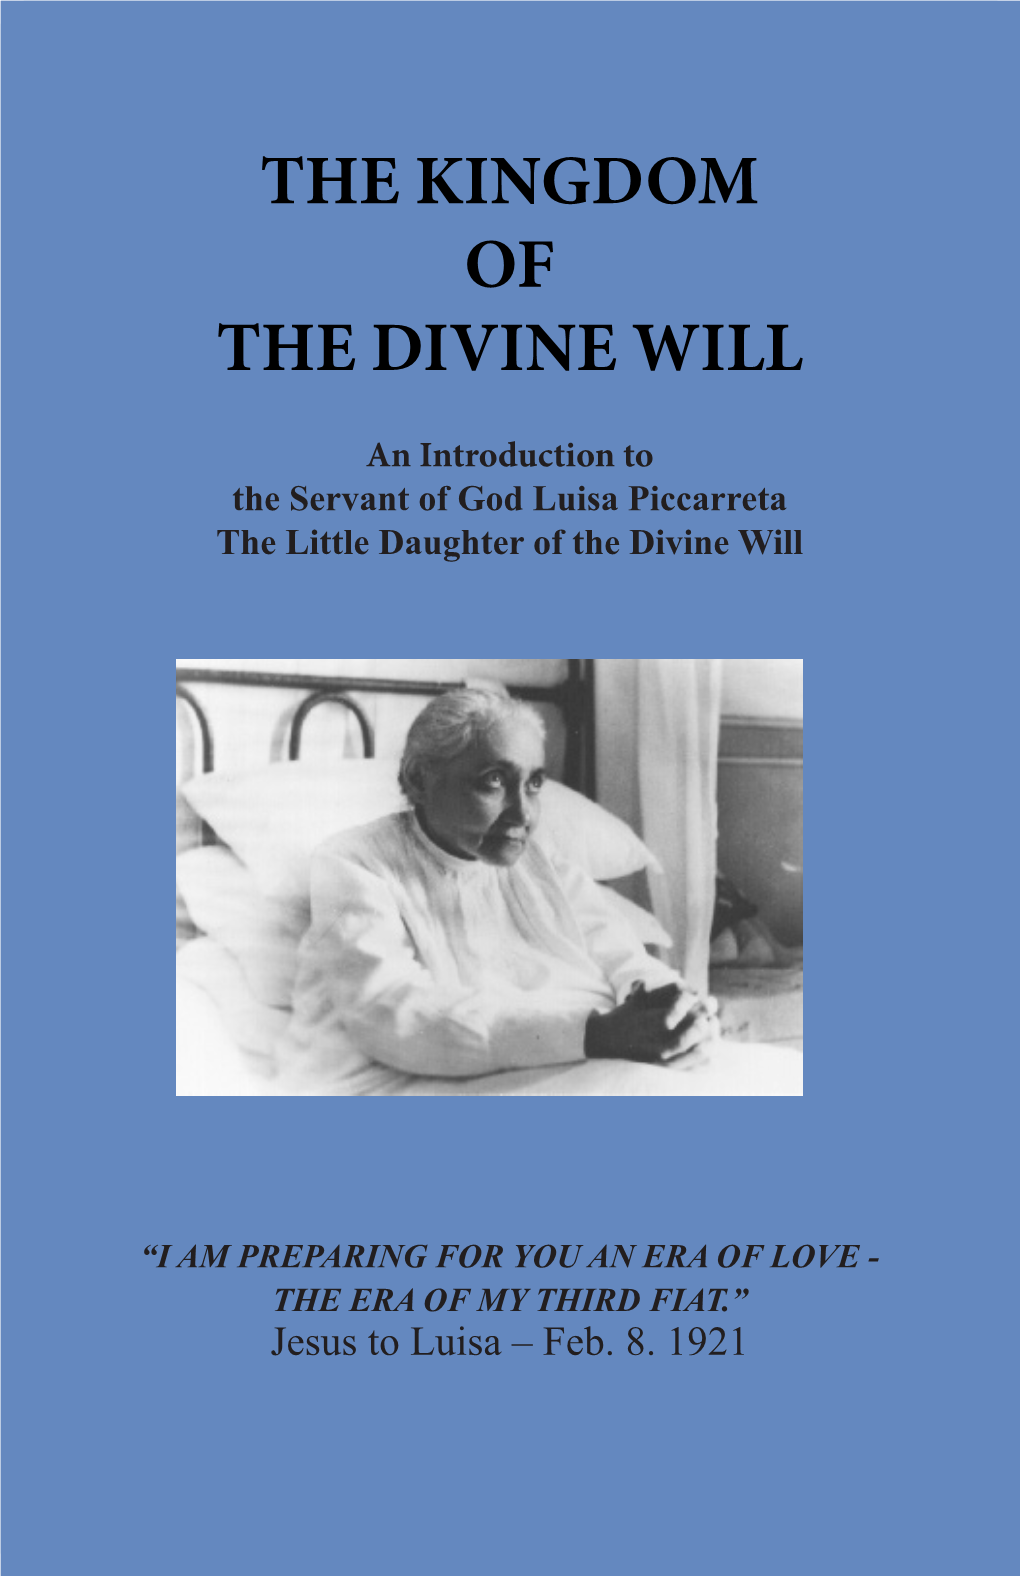 The Kingdom of the Divine Will, Have Each Given Their Appeal to All As Regards These Writings and the Living in the Divine Will�